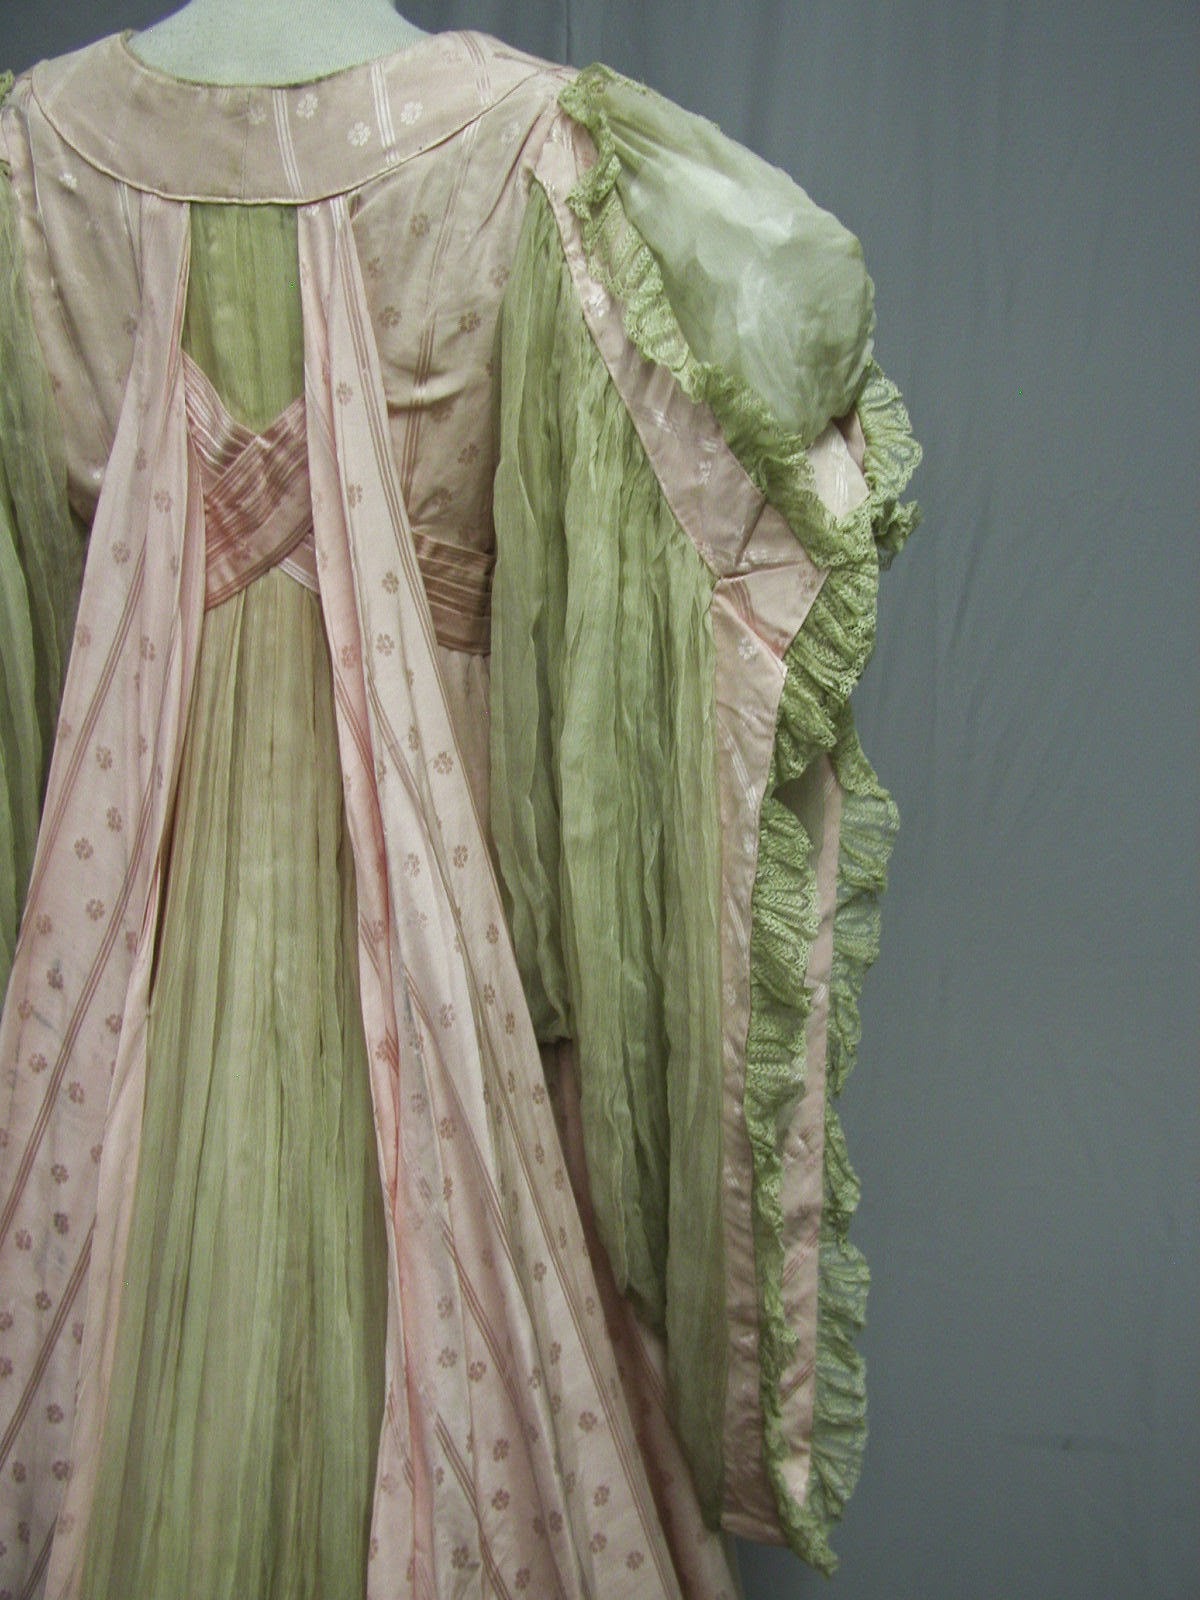 All The Pretty Dresses: Edwardian Tea Gown